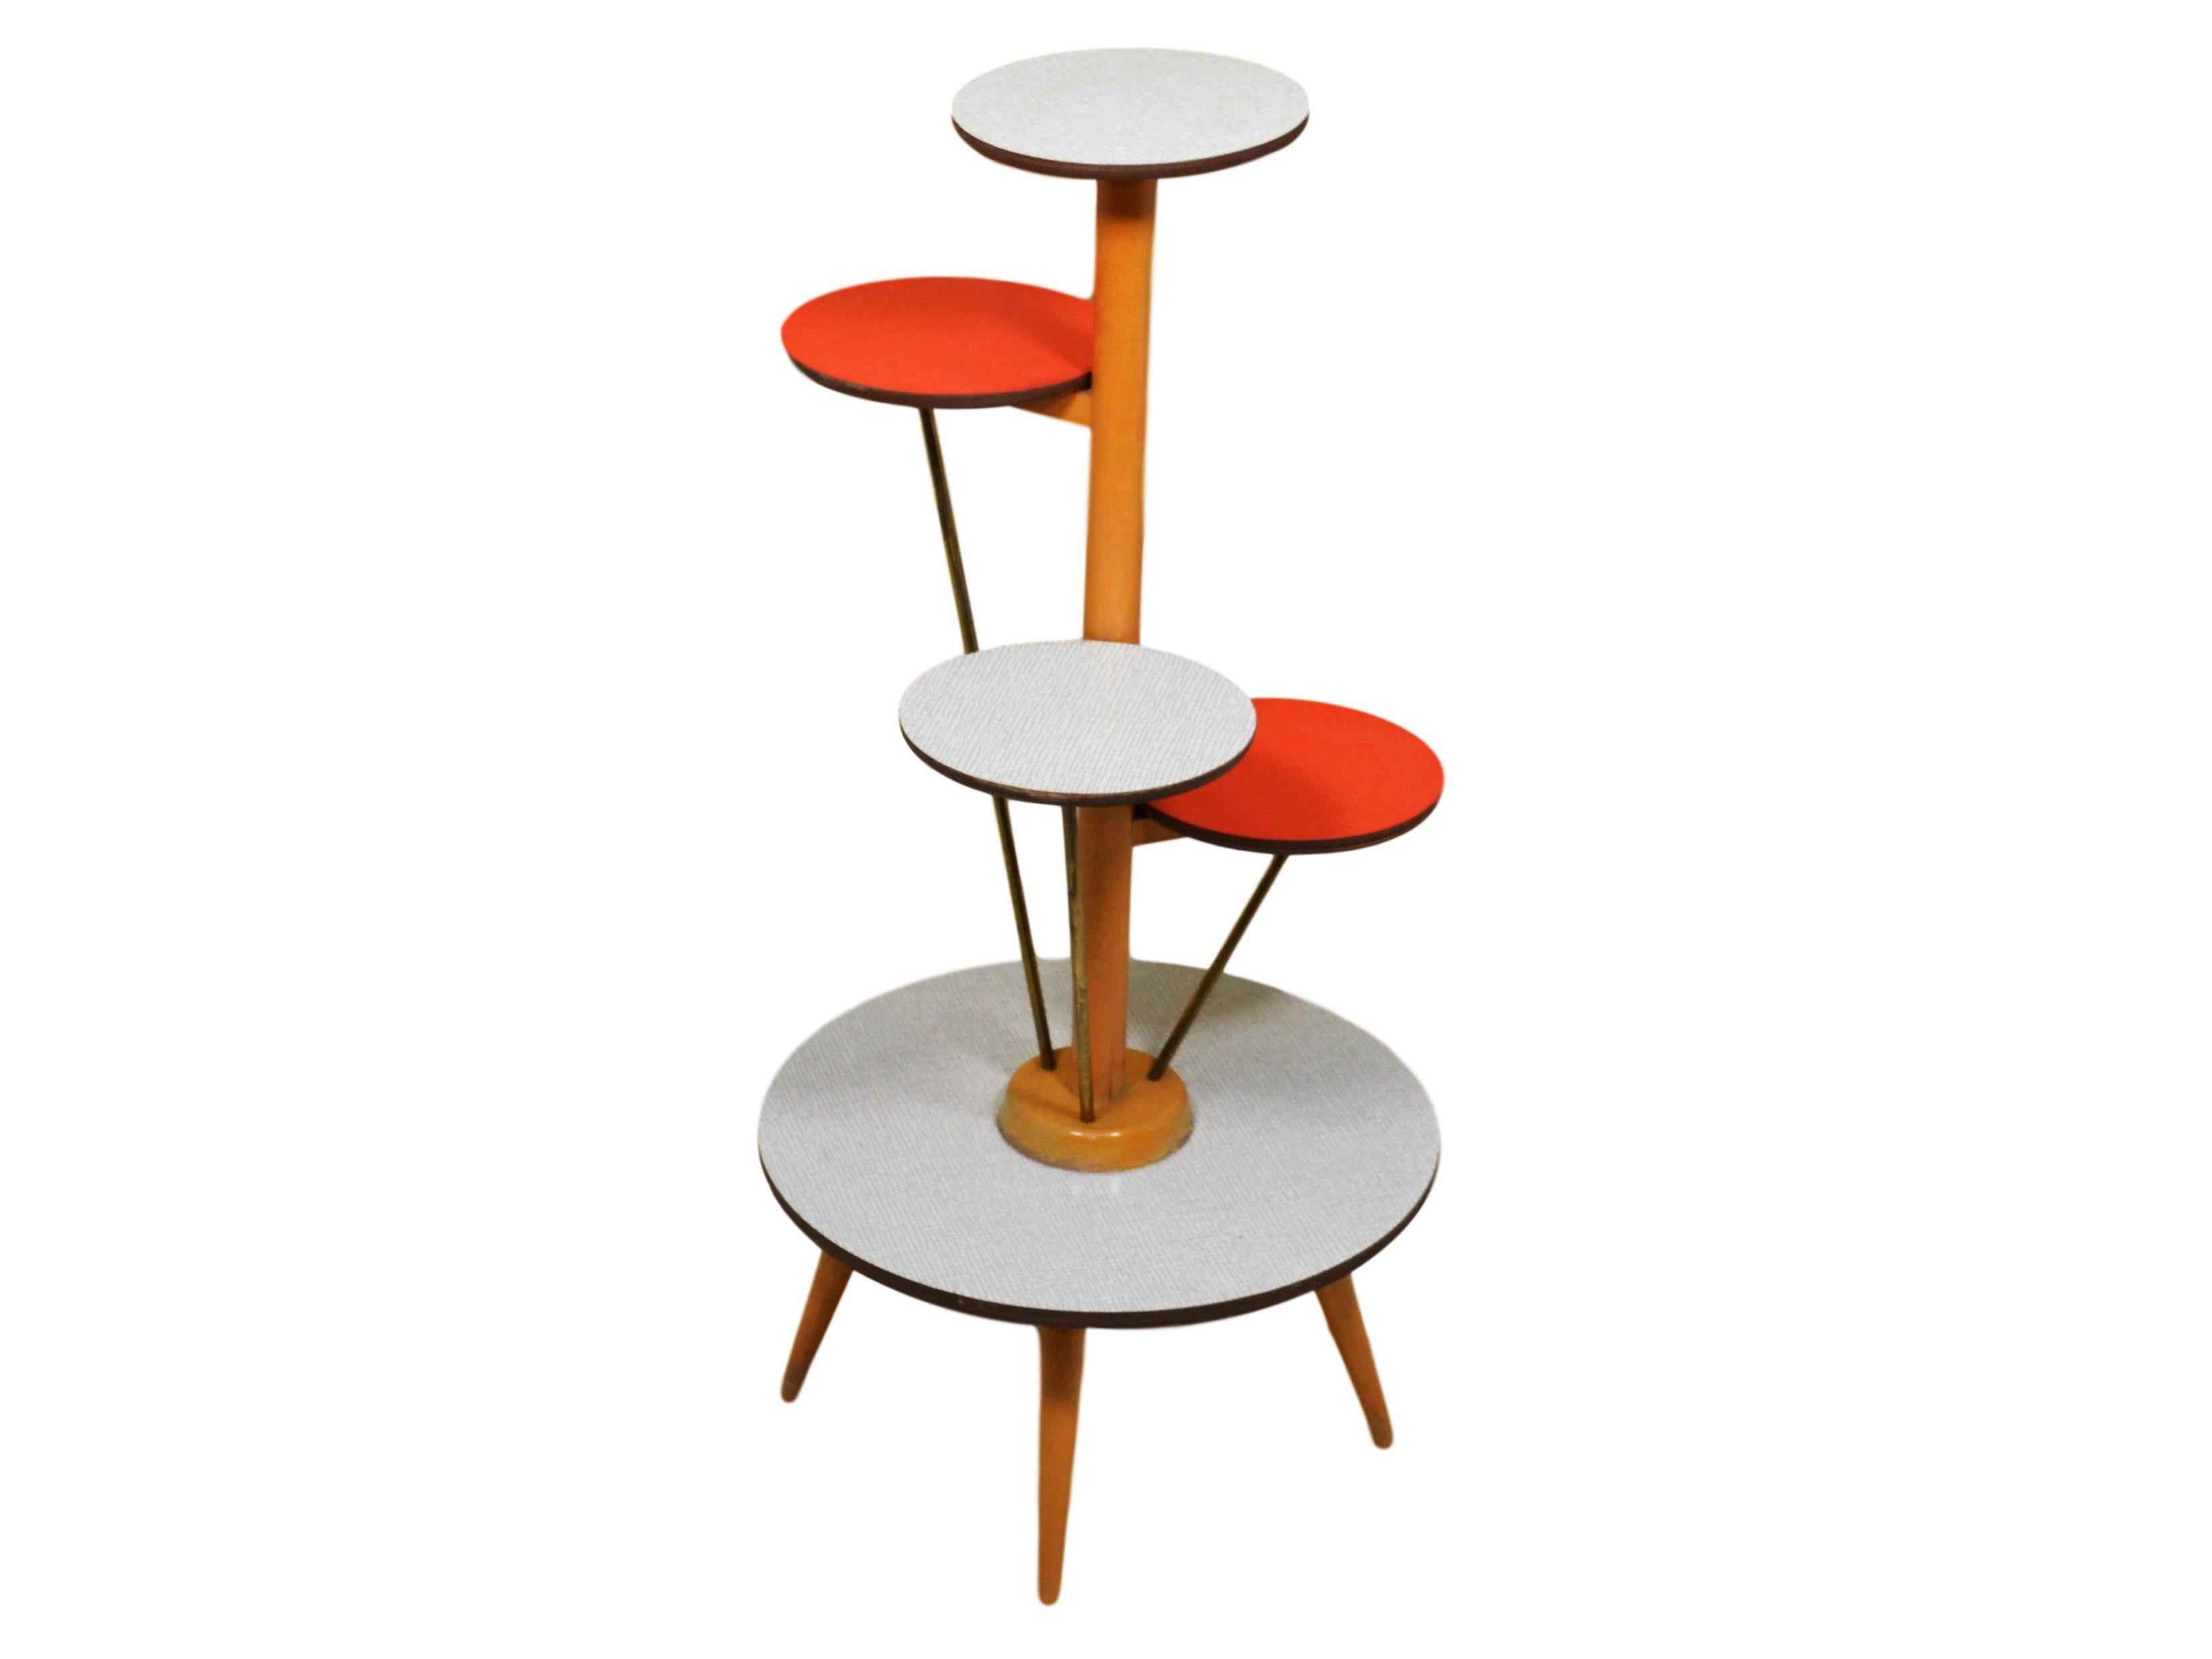 This is a 5-tier 1950s German plant stand. Made by Ilse Möbel. Great for displaying plants or ornaments. Two of the tiers are red. The base, middle and top tier are white with gray plaid pattern.

Very good condition. There is a small chip on the